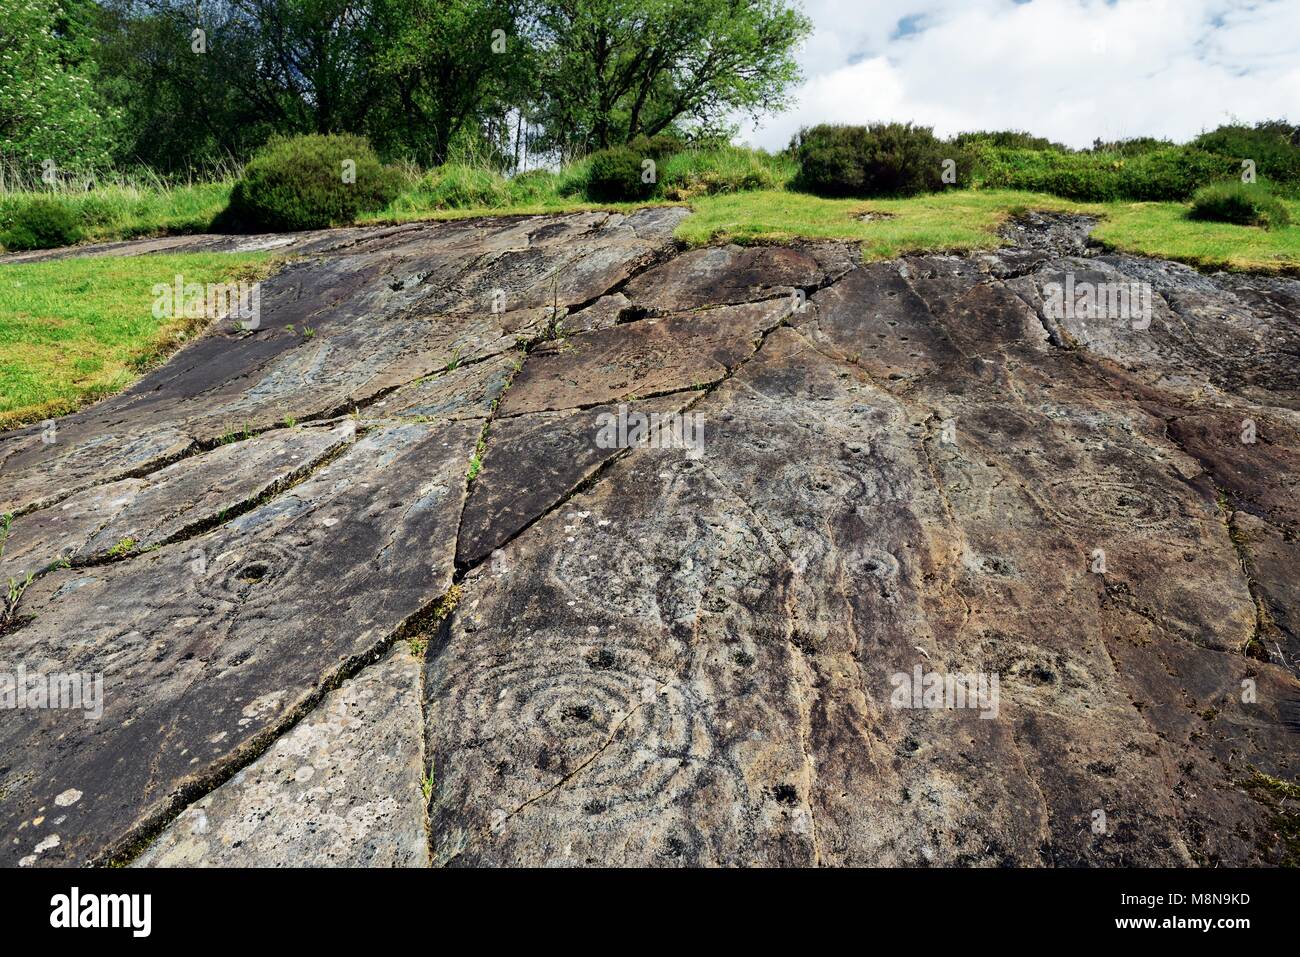 Cup and ring mark marks prehistoric Neolithic rock art on natural rock outcrop at Achnabreck in Kilmartin Valley, Argyll, Scotland, UK Stock Photo